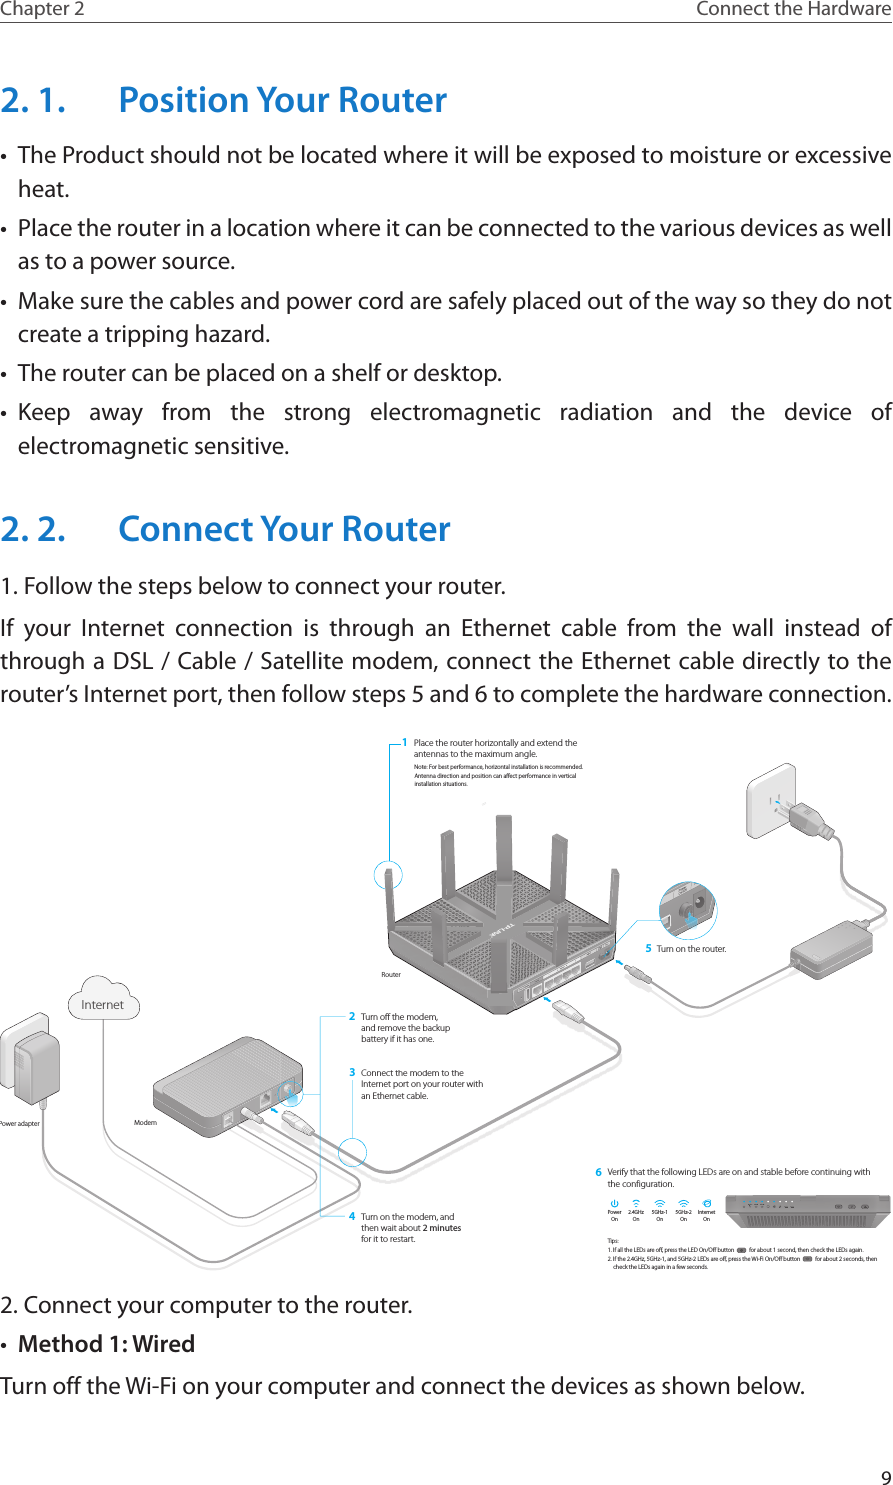 9Chapter 2 Connect the Hardware2. 1.  Position Your Router•  The Product should not be located where it will be exposed to moisture or excessive heat.•  Place the router in a location where it can be connected to the various devices as well as to a power source.•  Make sure the cables and power cord are safely placed out of the way so they do not create a tripping hazard.•  The router can be placed on a shelf or desktop.•  Keep away from the strong electromagnetic radiation and the device of electromagnetic sensitive.2. 2.  Connect Your Router1. Follow the steps below to connect your router.If your Internet connection is through an Ethernet cable from the wall instead of through a DSL / Cable / Satellite modem, connect the Ethernet cable directly to the router’s Internet port, then follow steps 5 and 6 to complete the hardware connection.Turn on the modem, and then wait about 2 minutes for it to restart.Connect the modem to the Internet port on your router with an Ethernet cable.RouterModemPower adapterTurn off the modem, and remove the backup battery if it has one.2Place the router horizontally and extend the antennas to the maximum angle.1Note: For best performance, horizontal installation is recommended.Antenna direction and position can affect performance in vertical installation situations.43Connect the modem to the Internet port on your router with an Ethernet cable.Turn off the modem,and remove the backupbattery if it has one.23Turn on the router.5Verify that the following LEDs are on and stable before continuing with the configuration.6InternetOnInternet5GHz-1On5GHz-2OnPowerOn2.4GHzOnTips: 1. If all the LEDs are off, press the LED On/Off button           for about 1 second, then check the LEDs again.2. If the 2.4GHz, 5GHz-1, and 5GHz-2 LEDs are off, press the Wi-Fi On/Off button           for about 2 seconds, then check the LEDs again in a few seconds.2. Connect your computer to the router.•  Method 1: WiredTurn off the Wi-Fi on your computer and connect the devices as shown below.